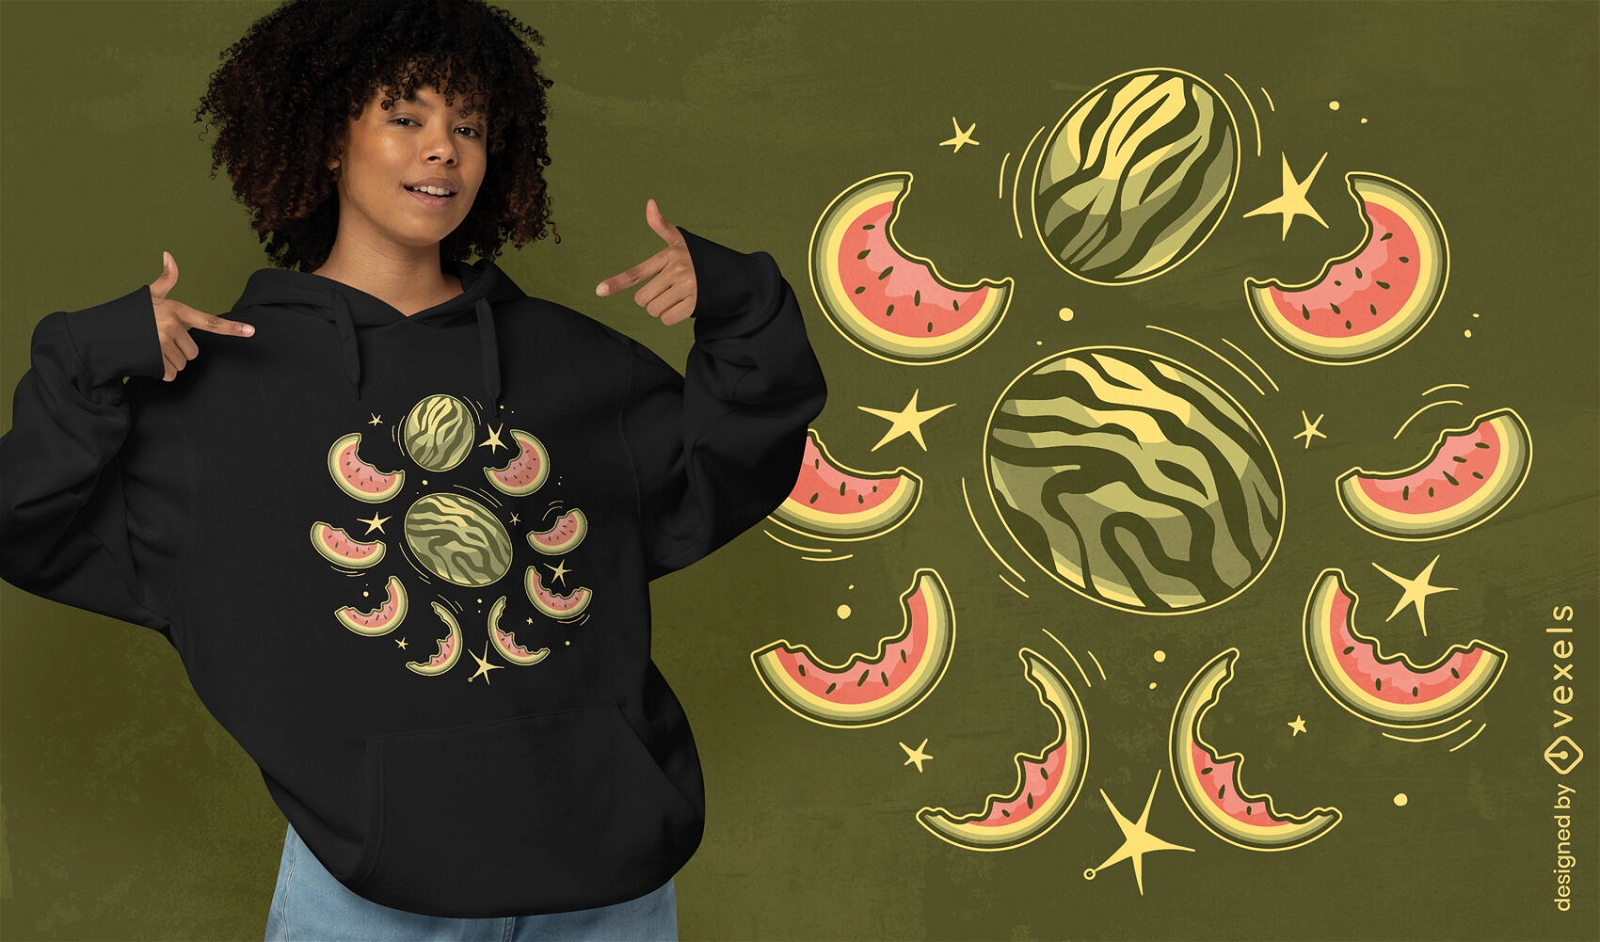 Watermelon phases of the moon t-shirt design